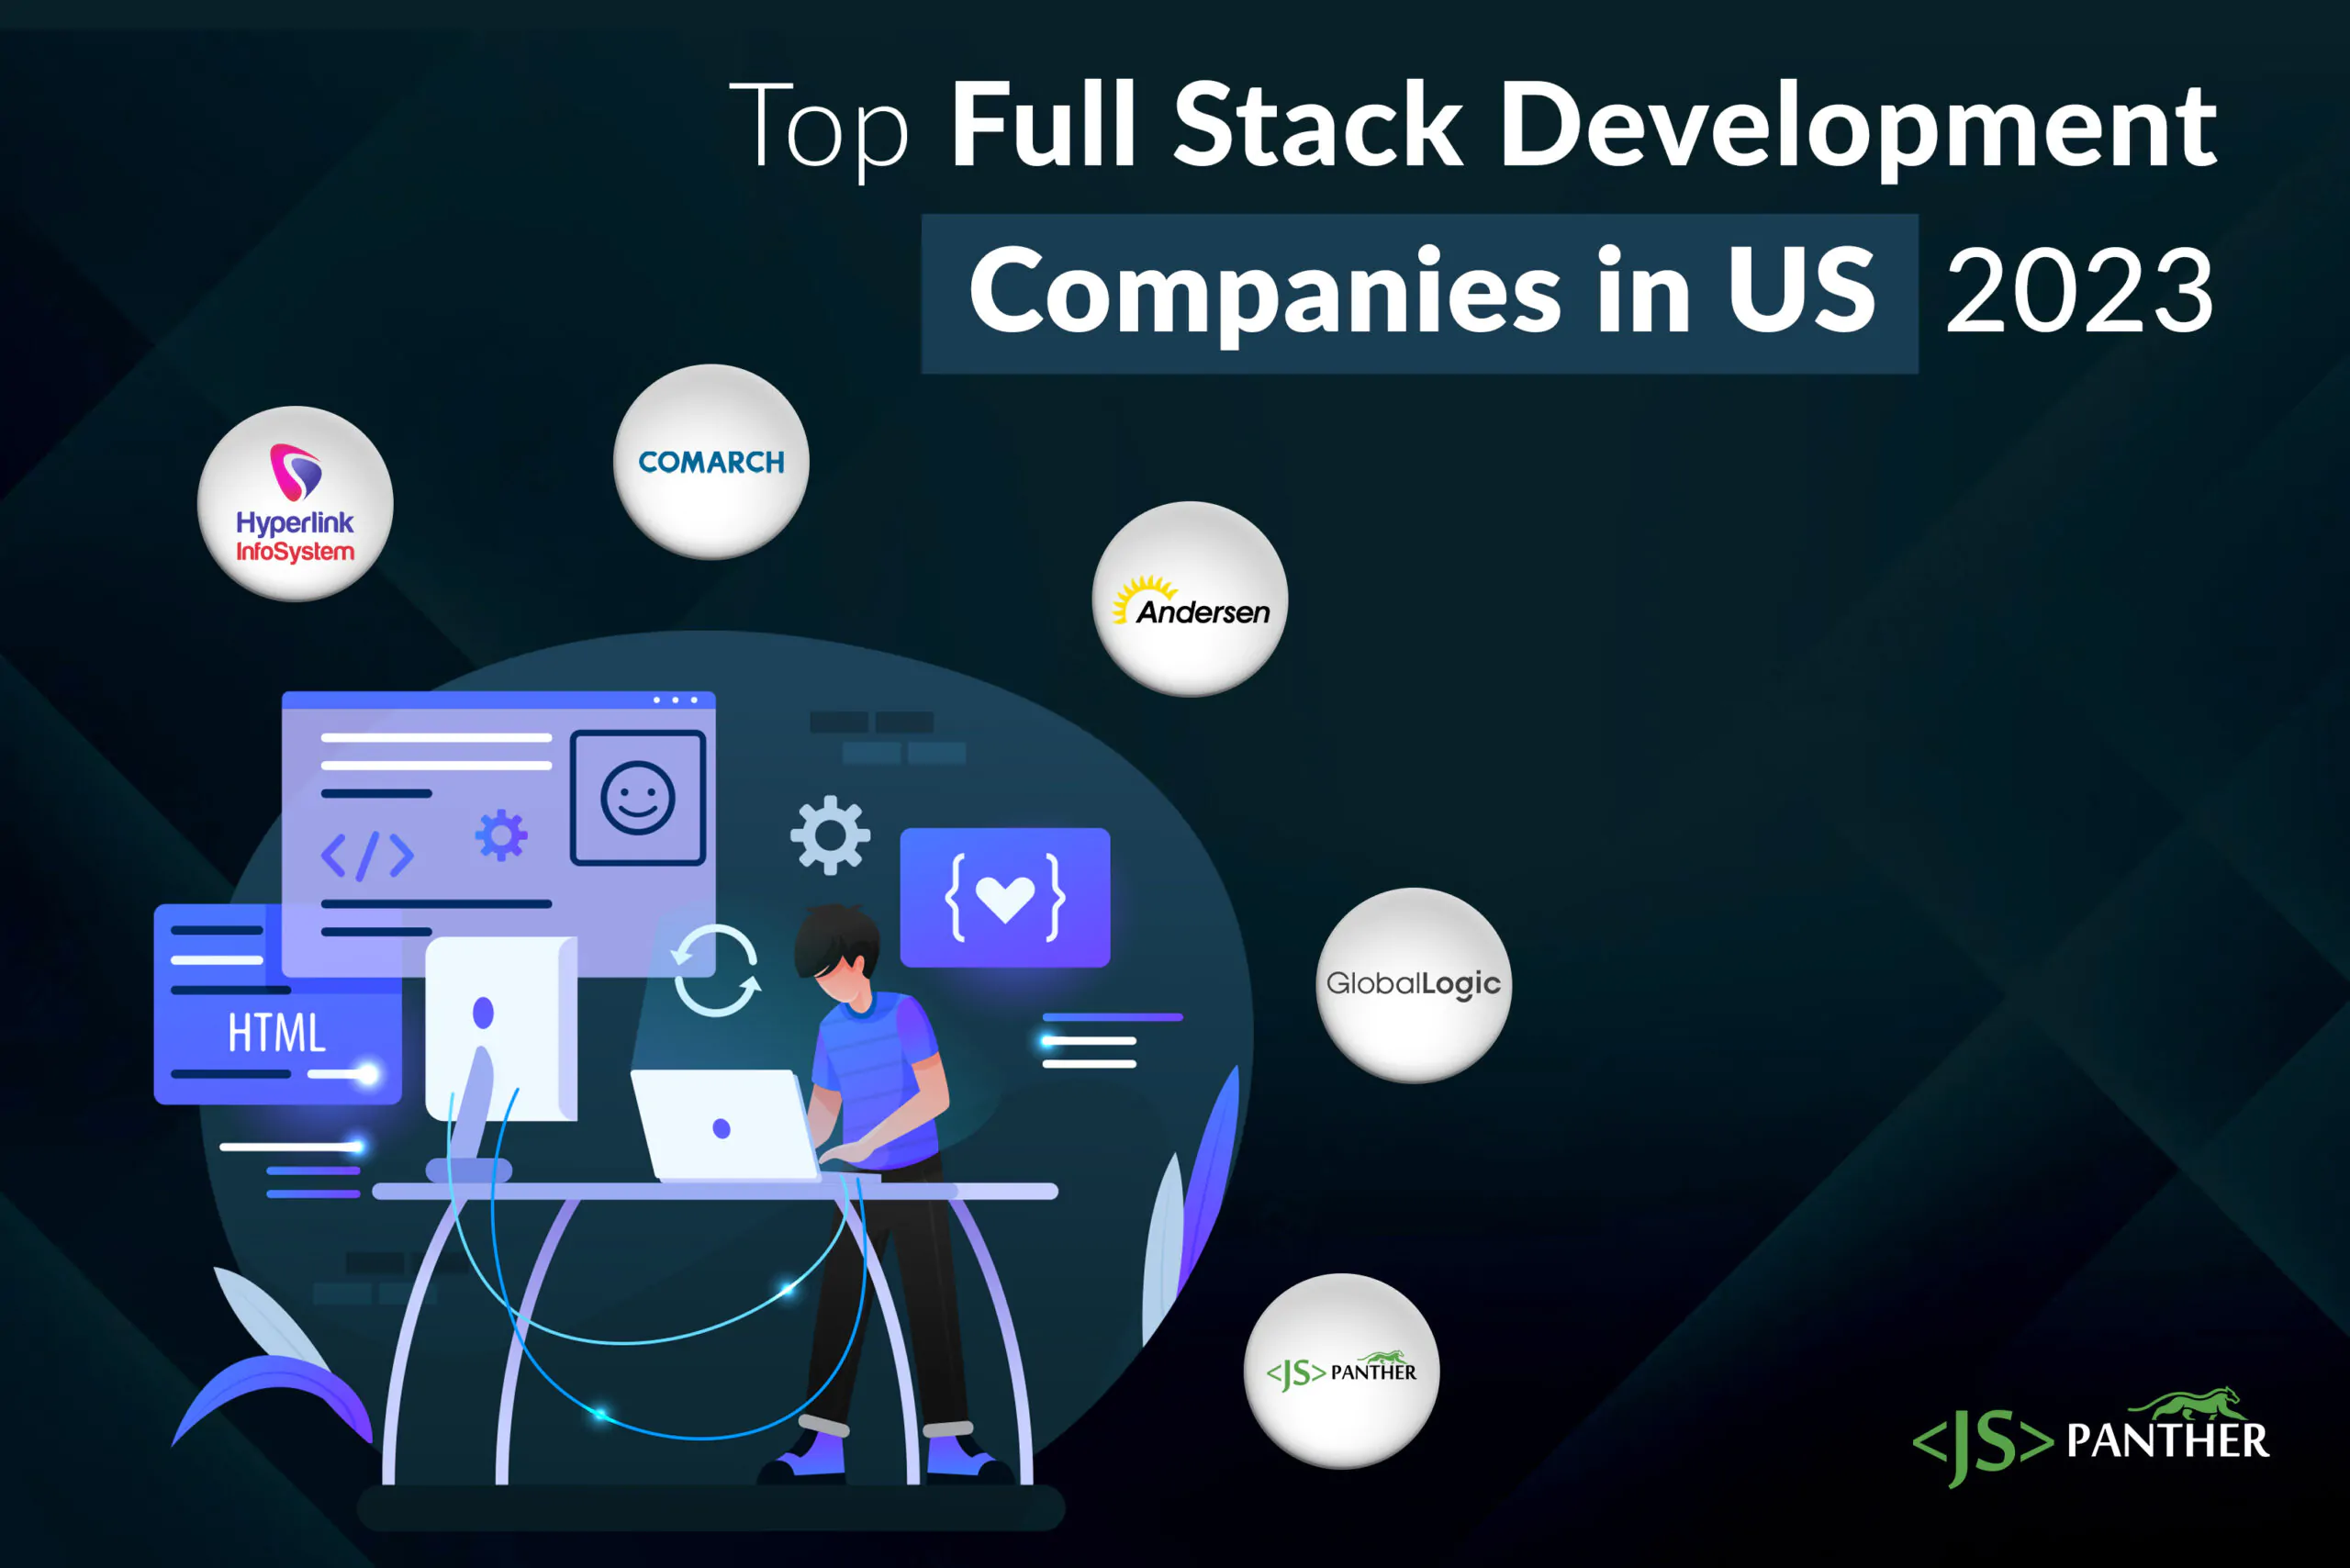 jspanther-off-site-image---Top-Full-Stack-Development-Companies-in-US-2023